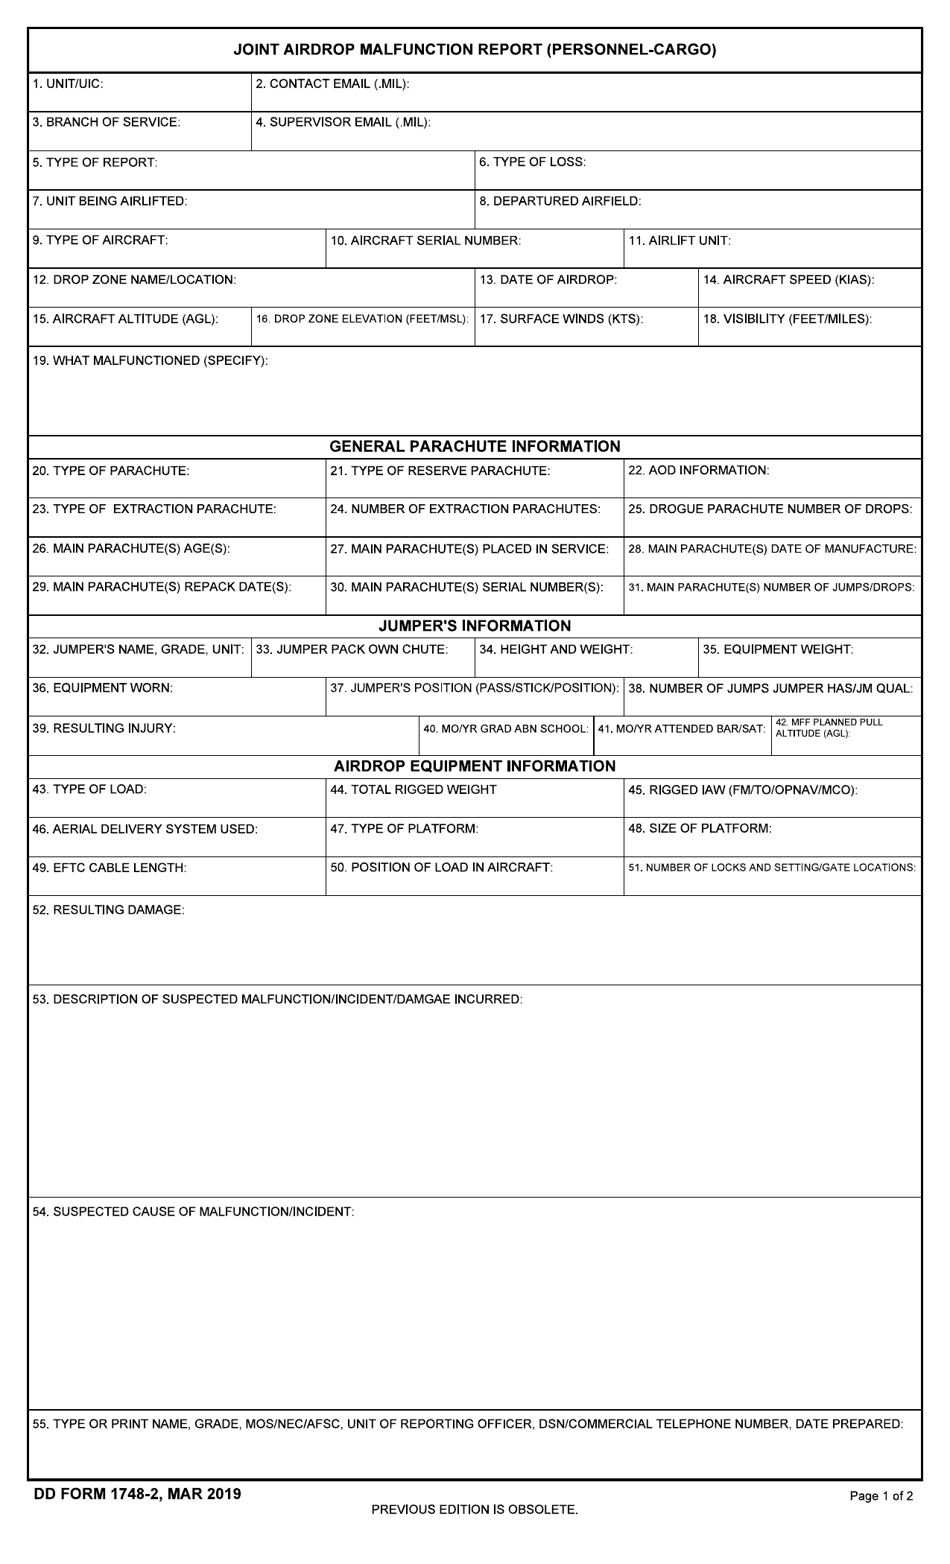 DD Form 1748-2 Airdrop Malfunction Report (Personnel-Cargo), Page 1